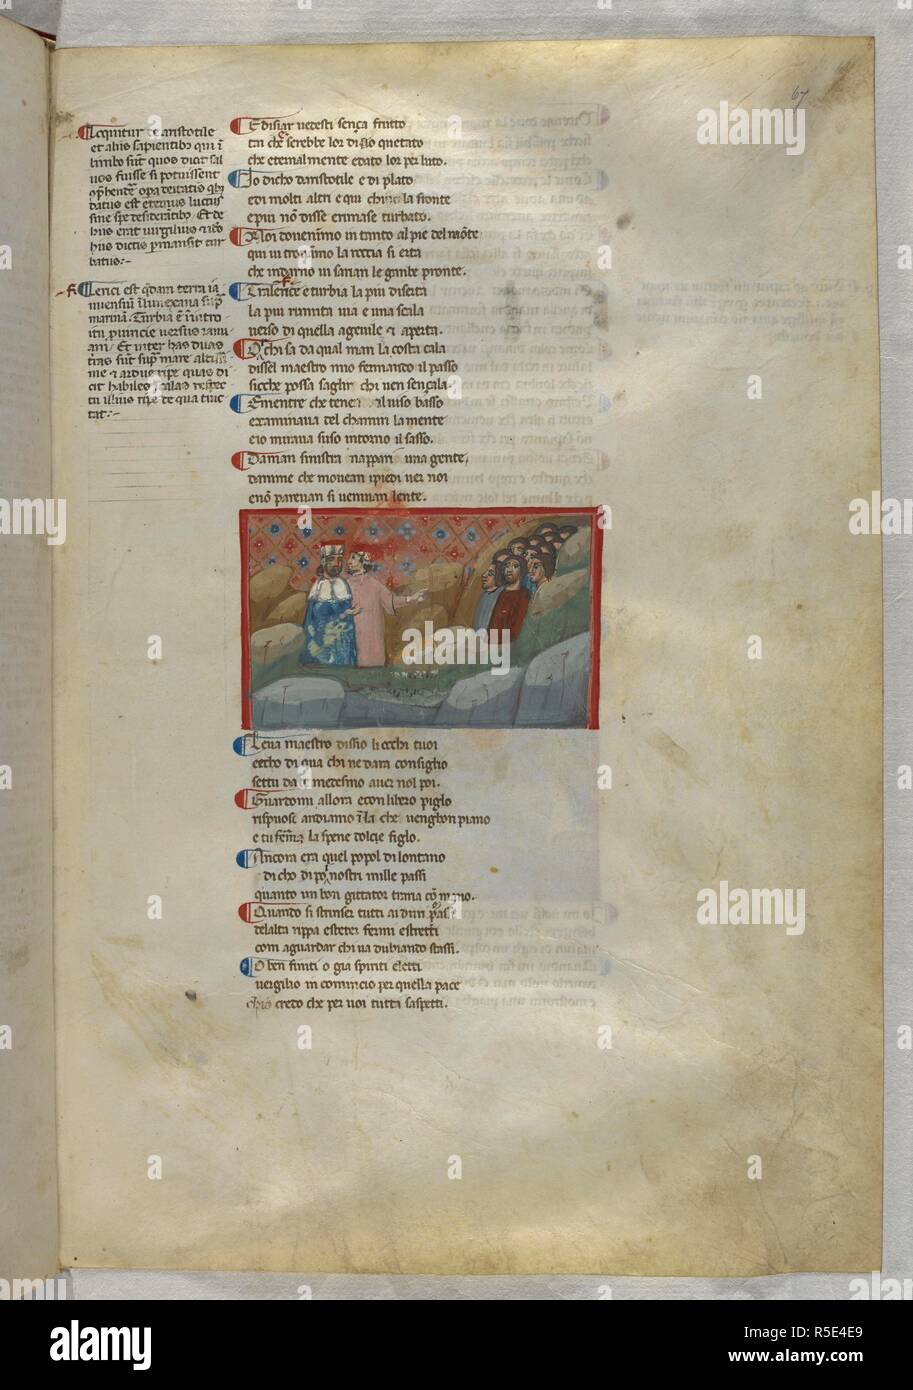 Purgatorio: Dante and Virgil meeting a group of souls of those who were excommunicated in Ante-Purgatory. Dante Alighieri, Divina Commedia ( The Divine Comedy ), with a commentary in Latin. 1st half of the 14th century. Source: Egerton 943, f.67. Language: Italian, Latin. Stock Photo